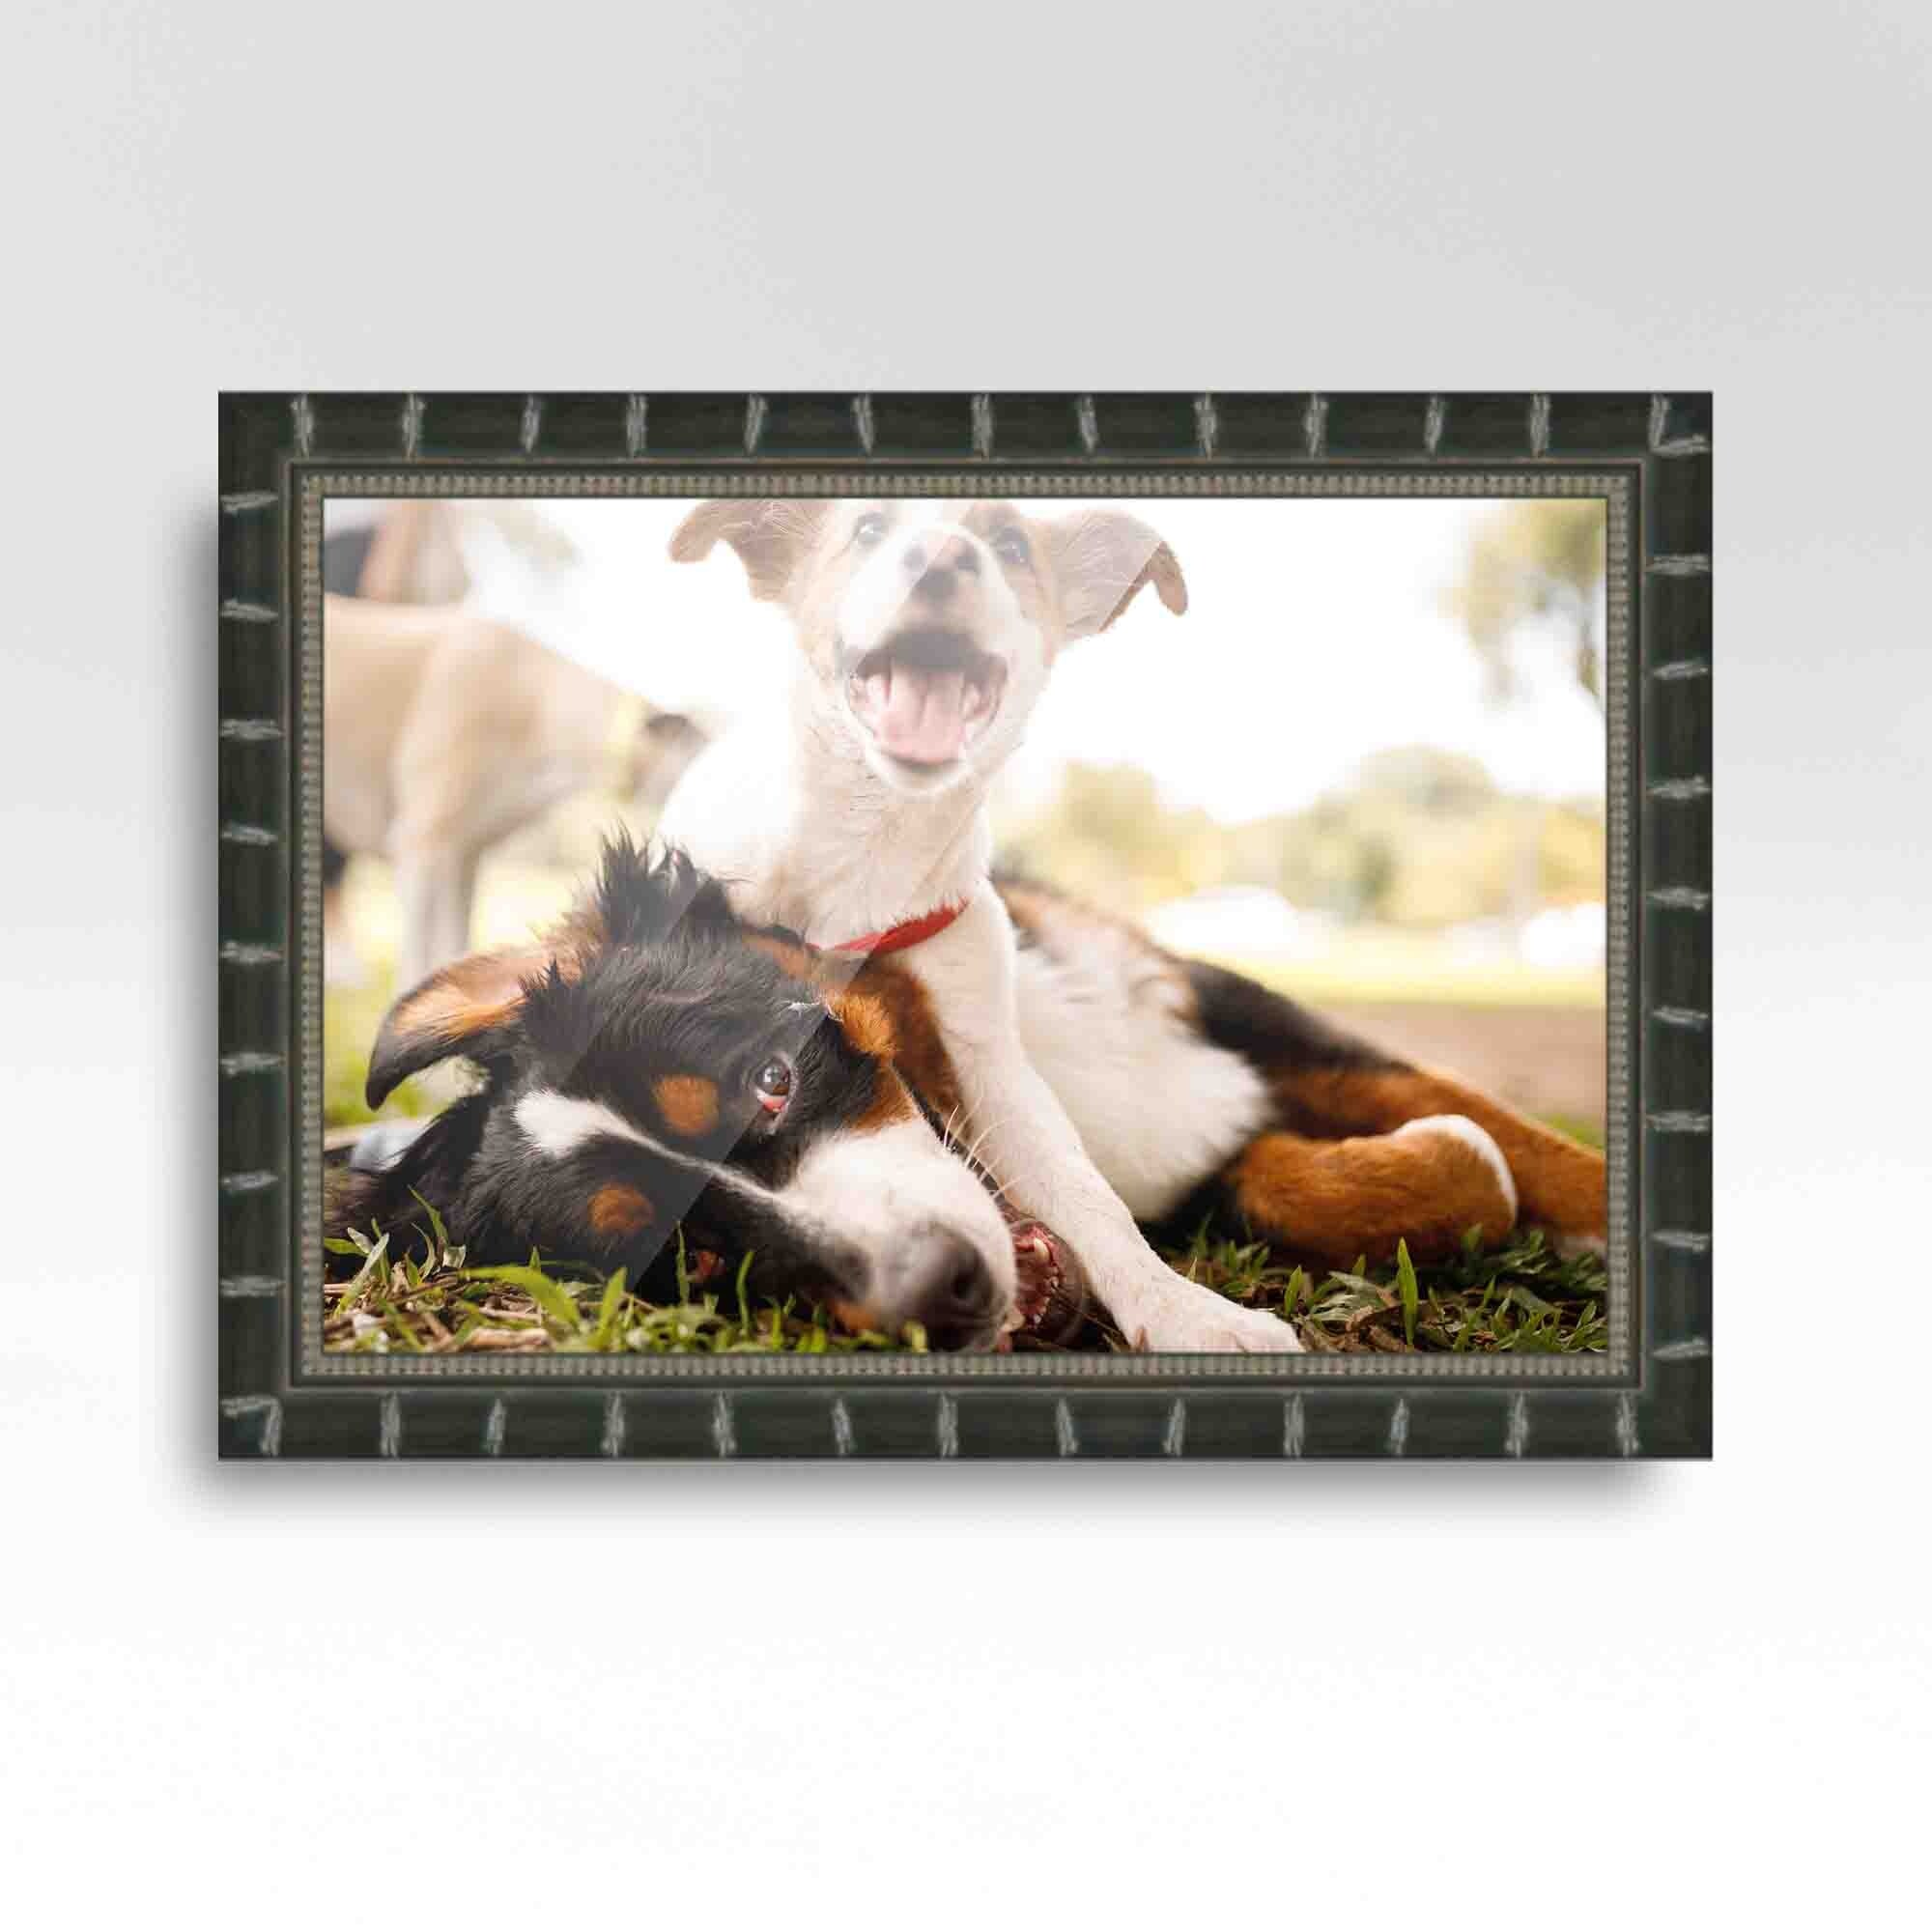 14x36 Black Picture Frame - Wood Picture Frame Complete with UV